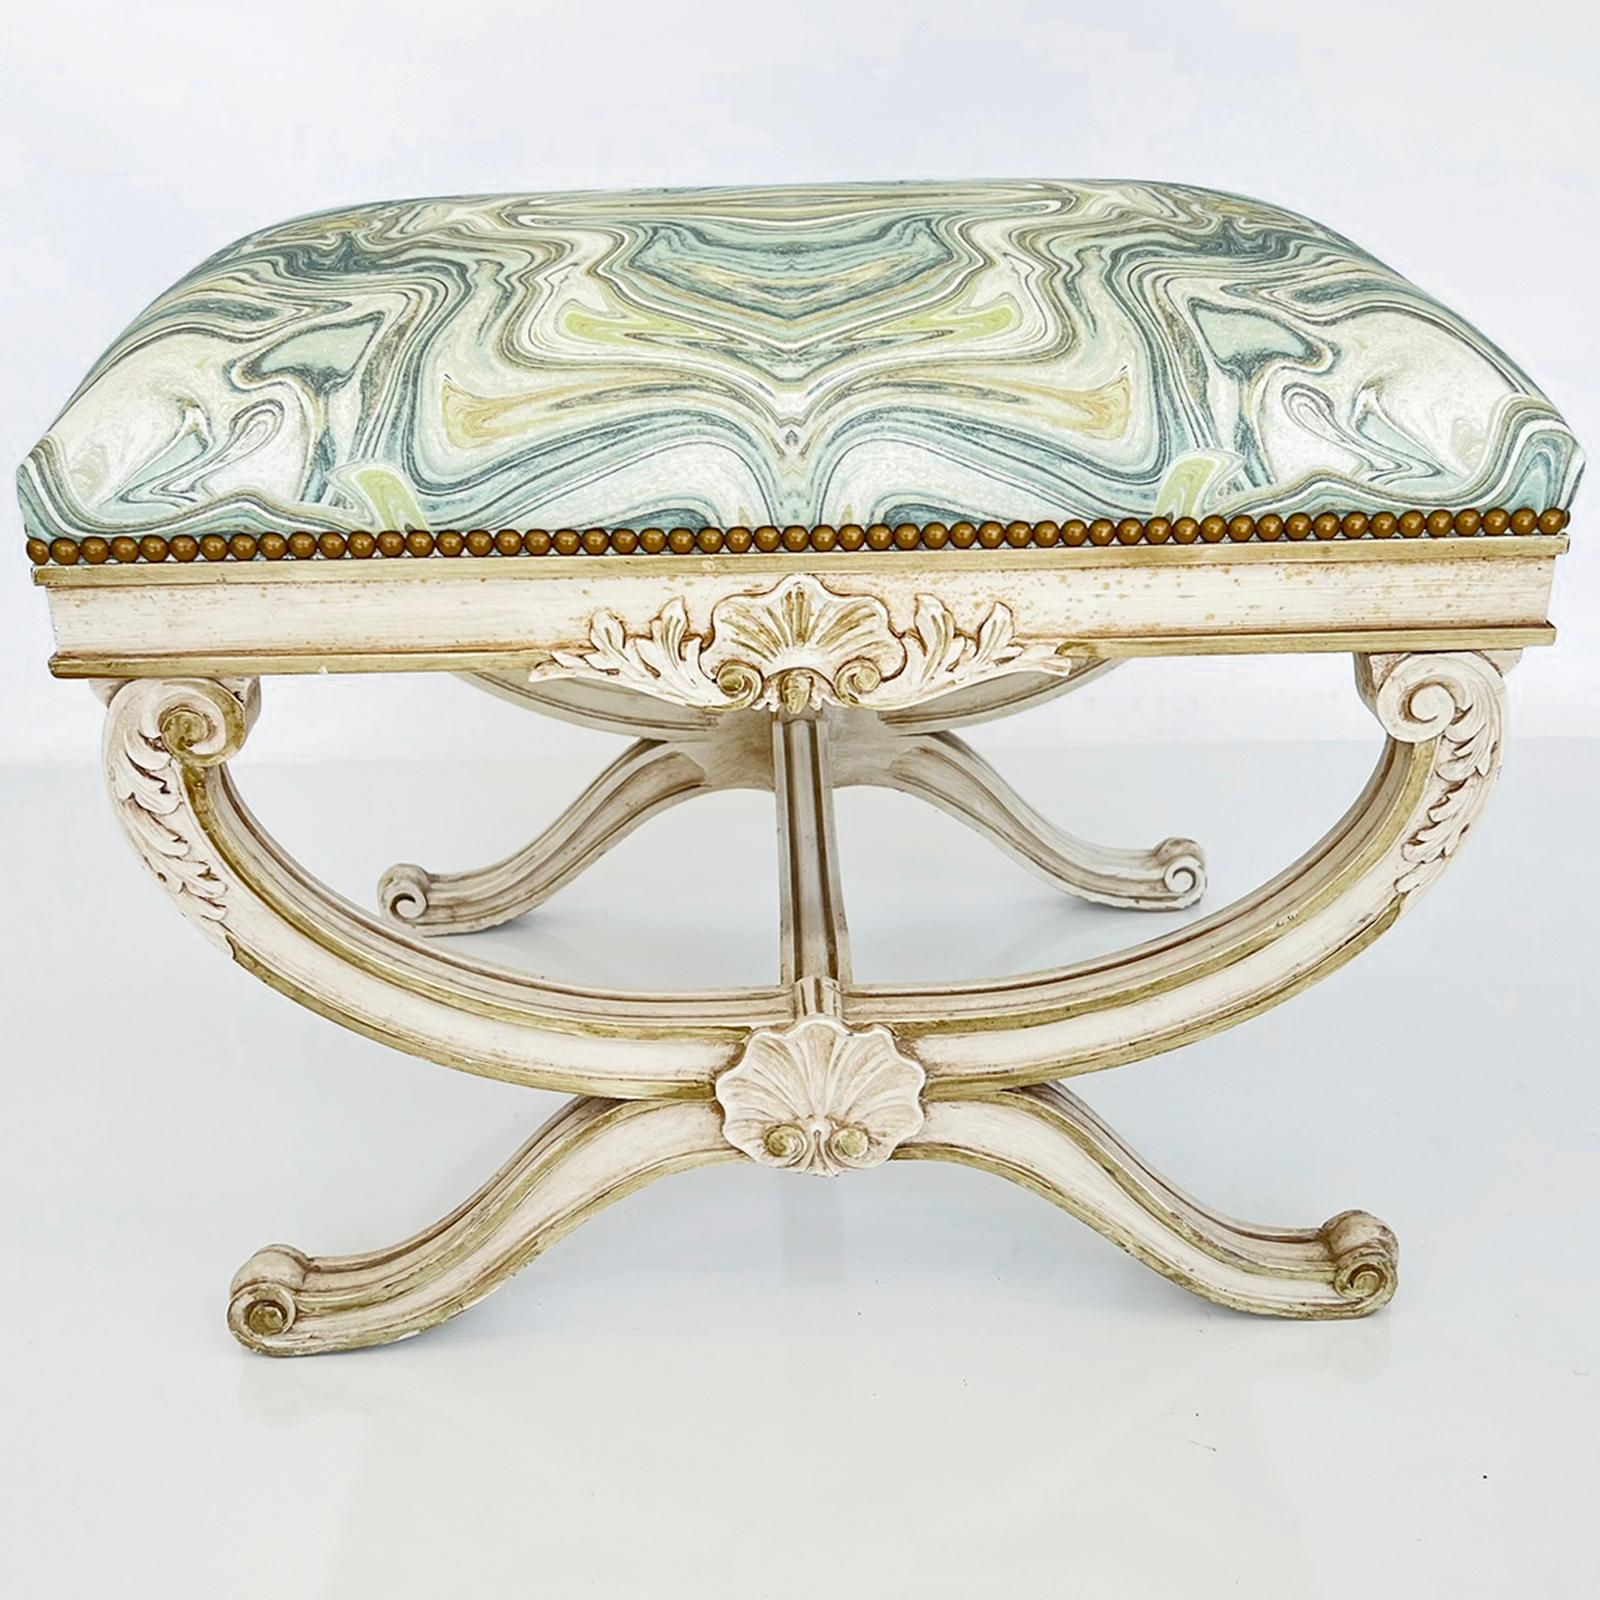 Curule-form bench, having a padded, crown seat of onyx-printed linen with nailheads, on an ivory painted frame showing natural wear, its fielded apron centered with an acanthus-flanked scallop shell, raised on channeled, acanthine-carved, X-frame